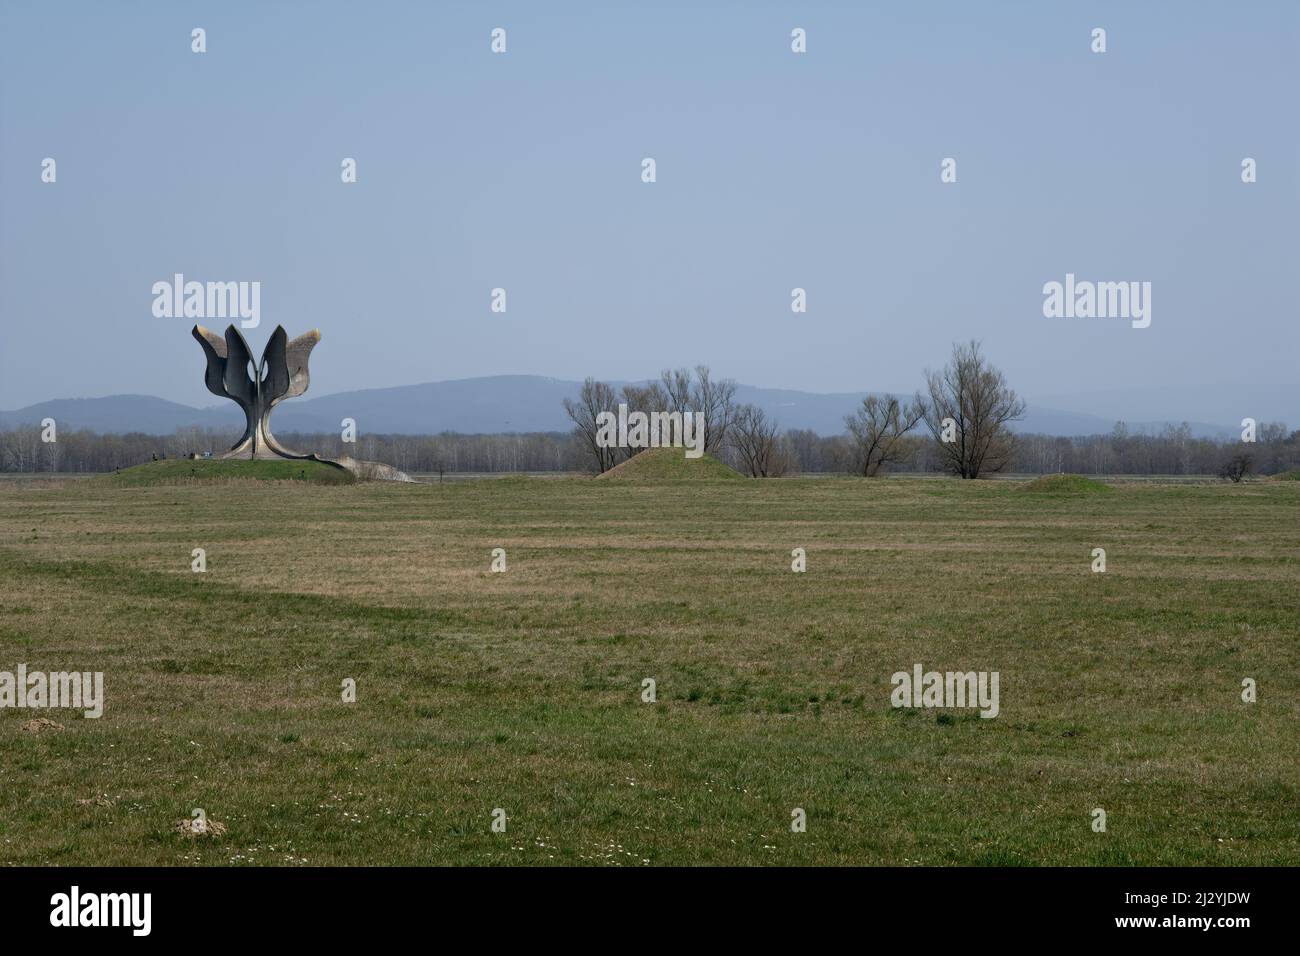 Jasenovac, Croatia - March 27, 2022:  Concentration and Extermination camp established in the village of Jasenovac and operated by the governing Ustas Stock Photo